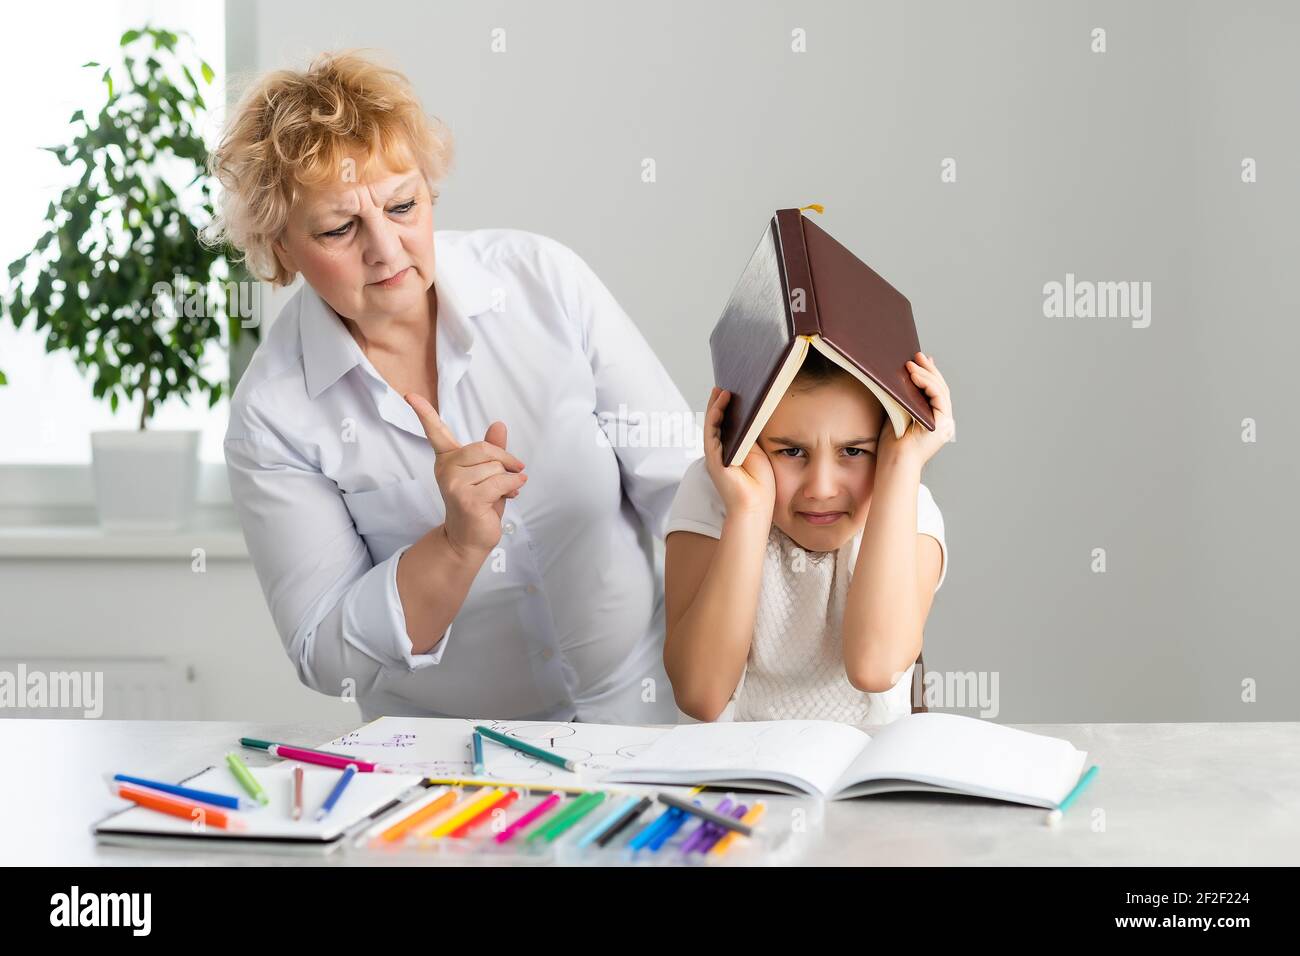 Mid aged grandmother scold grown up granddaughter, angry grandmother tell complaints lecturing child feeling stressed, misunderstandings, generational Stock Photo